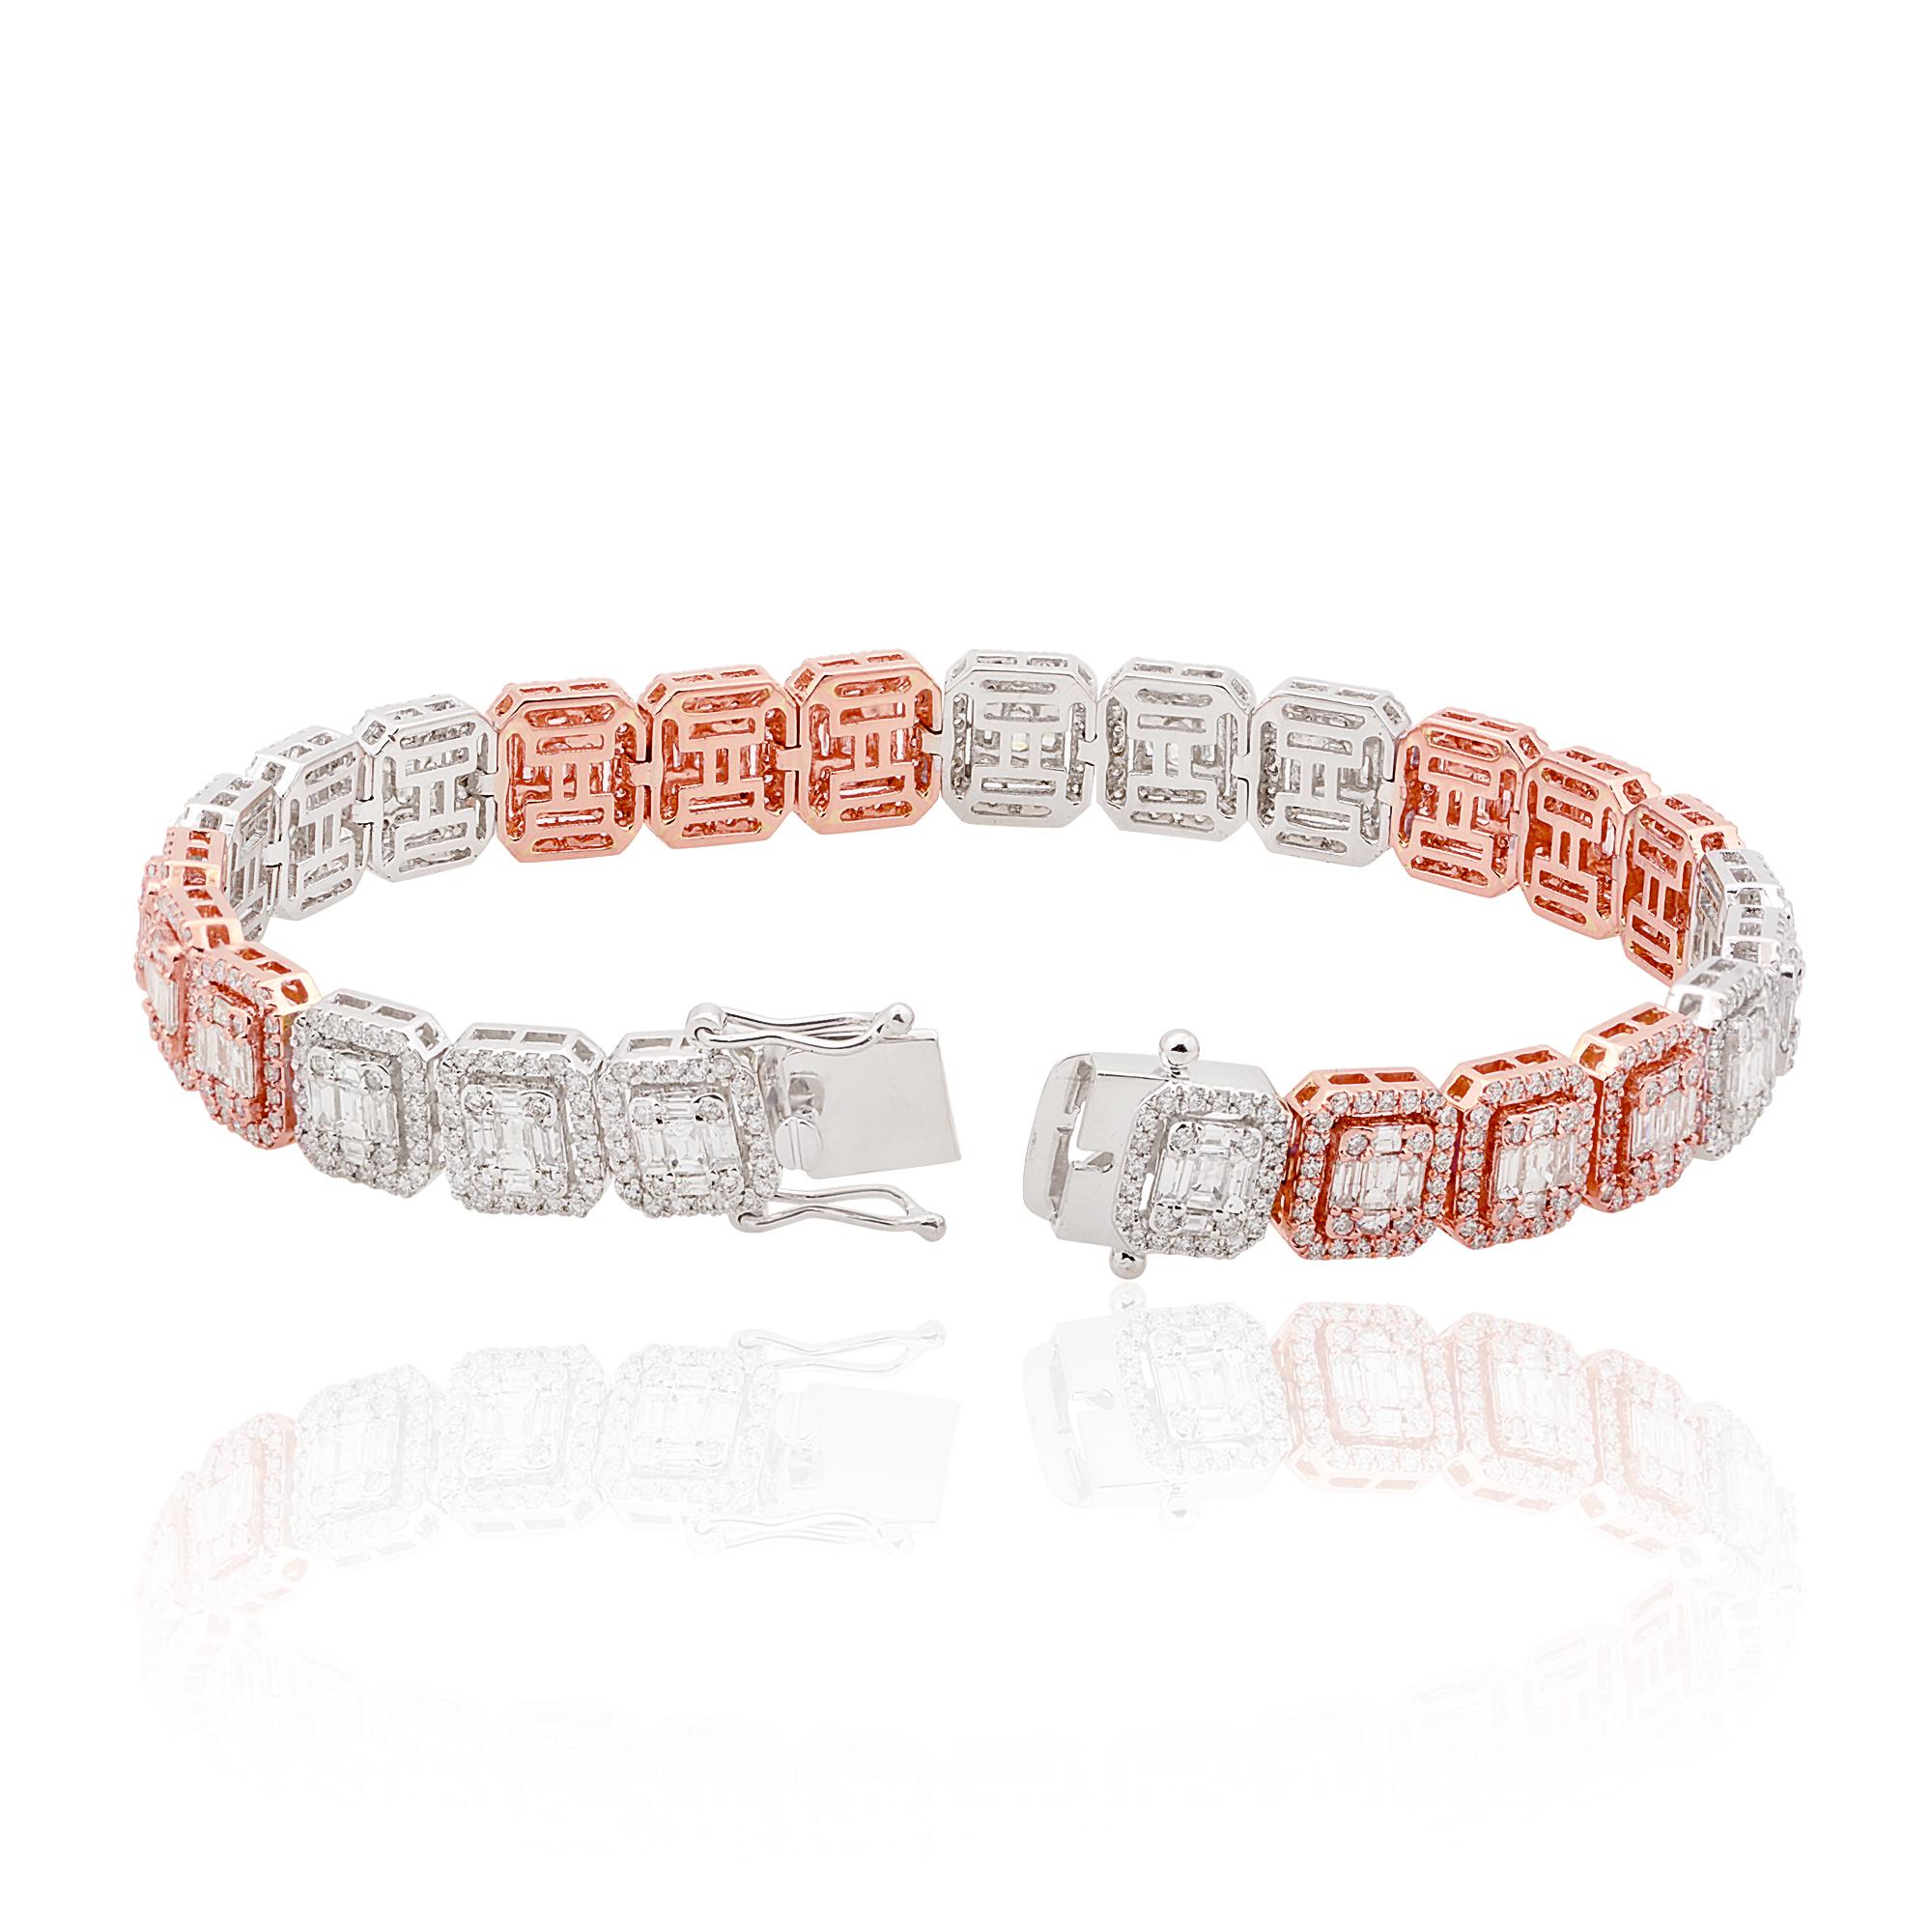 The link-style bracelet exudes a sense of refinement and versatility, making it suitable for both formal and casual occasions. The secure clasp ensures a comfortable and secure fit, allowing you to wear this magnificent bracelet with confidence.

✦